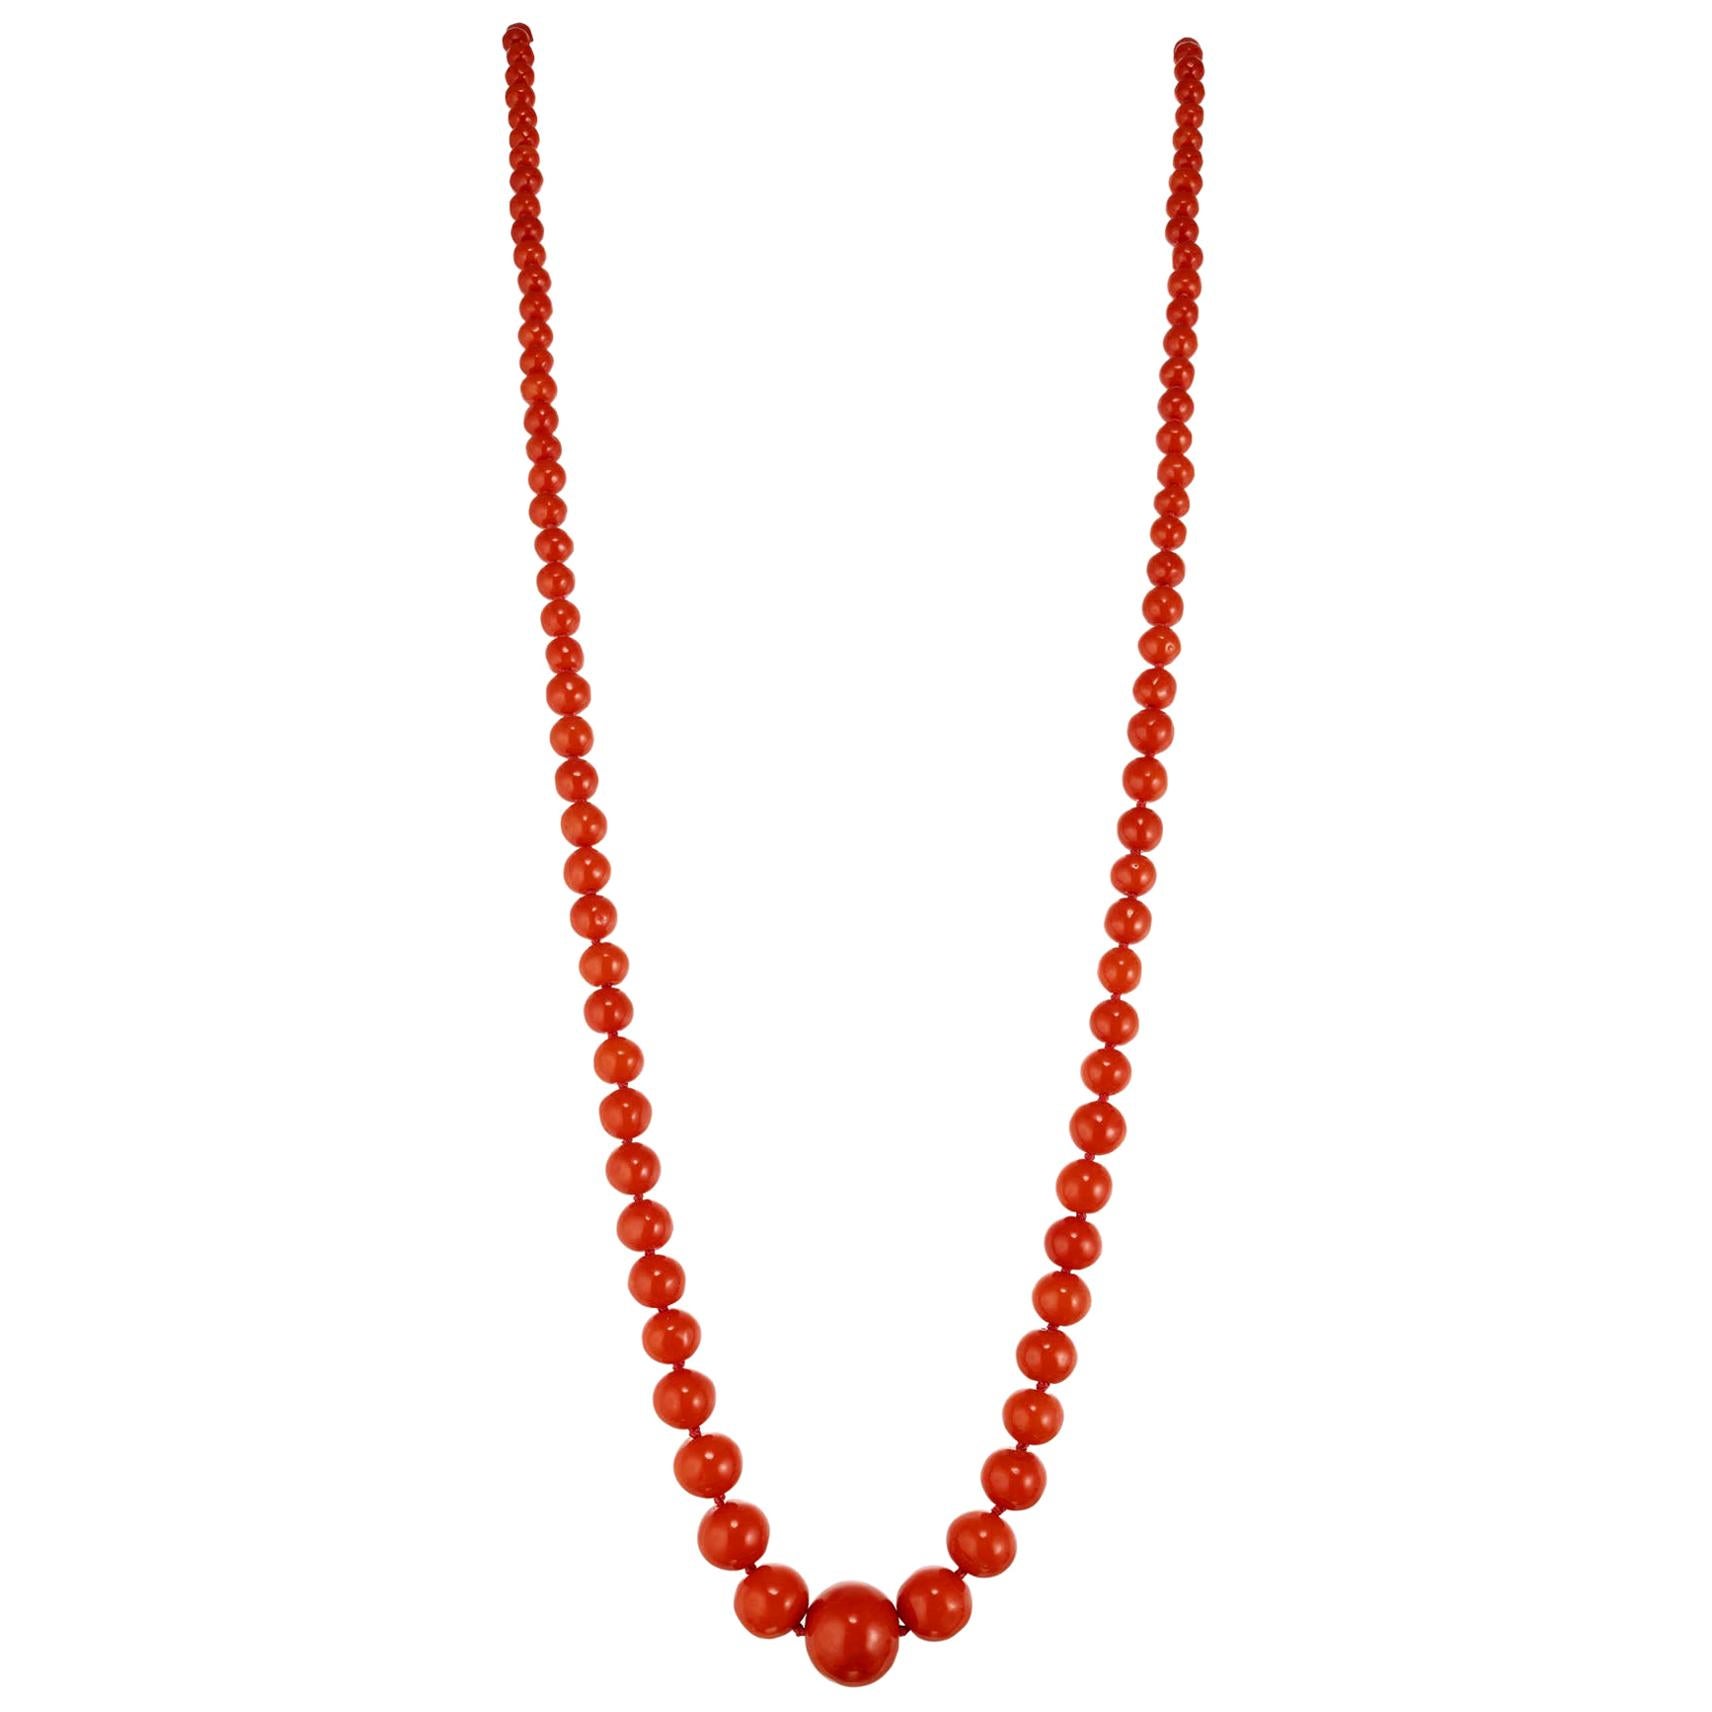 GIA Certified Victorian 1900s Polished Natural Orange Coral Graduated Necklace